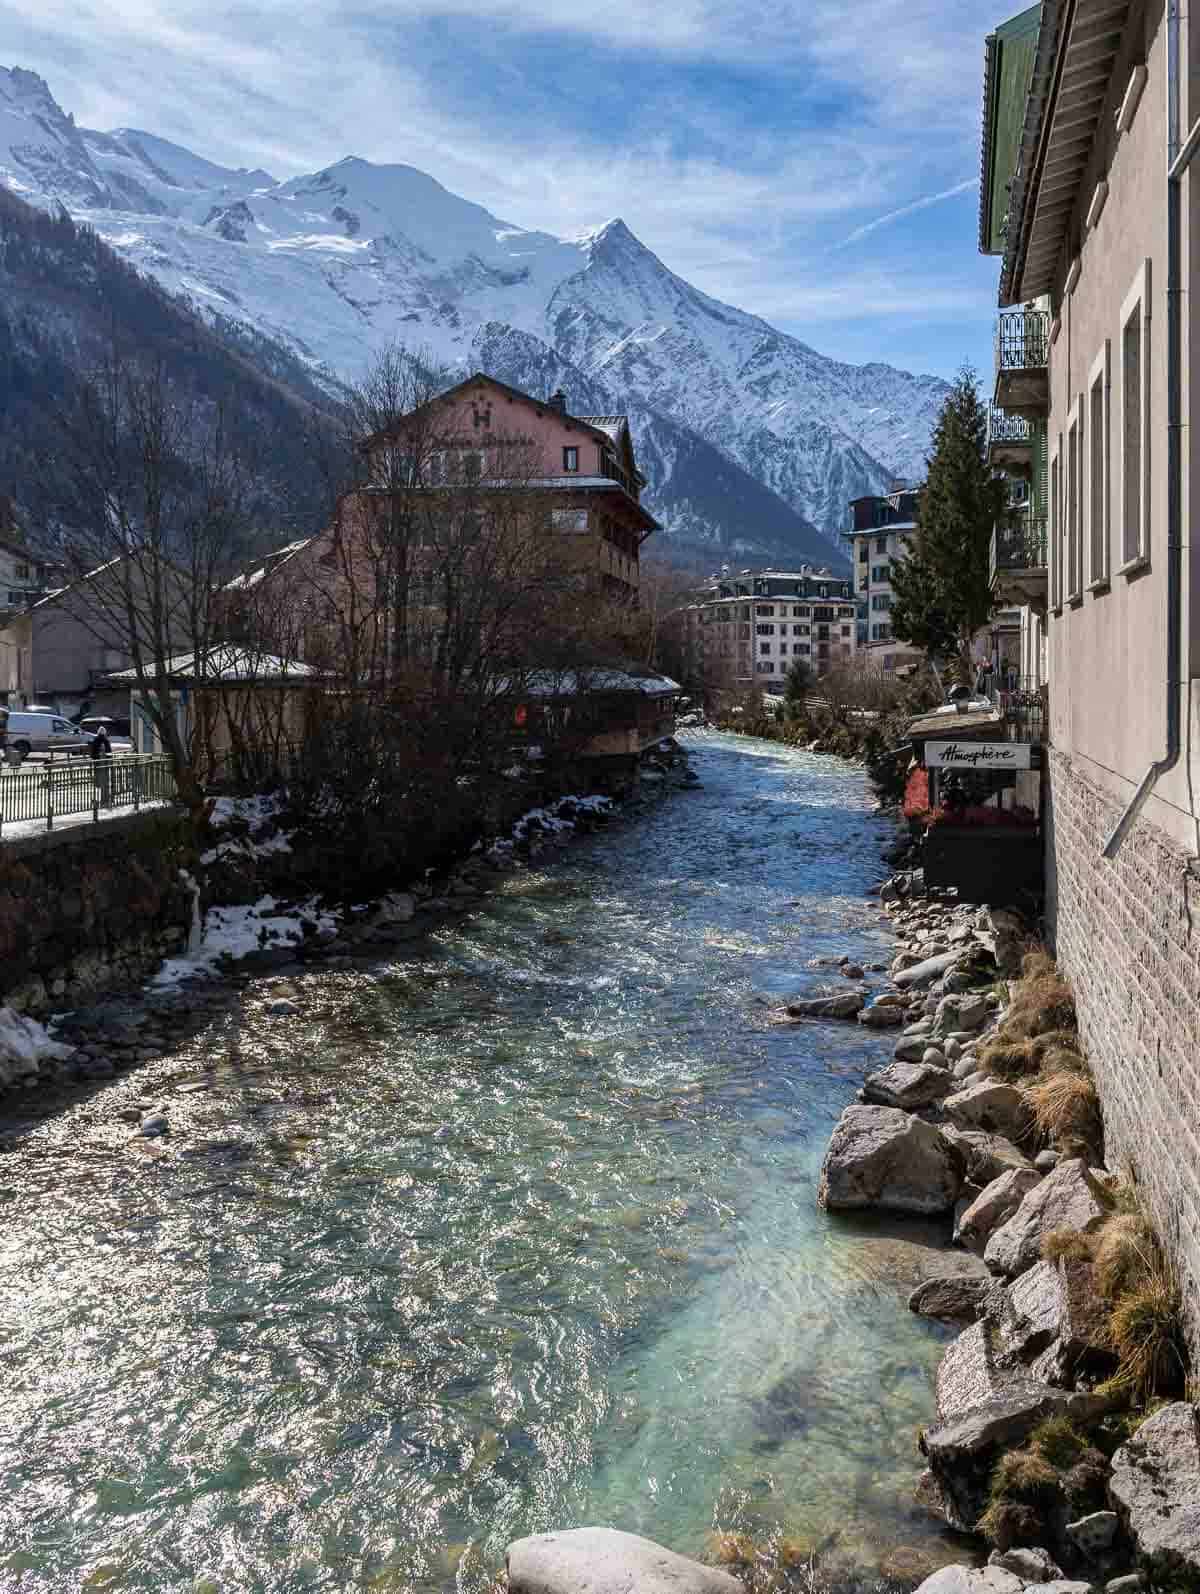 walking by the river crossing the town, one of the best things to do in Chamonix.